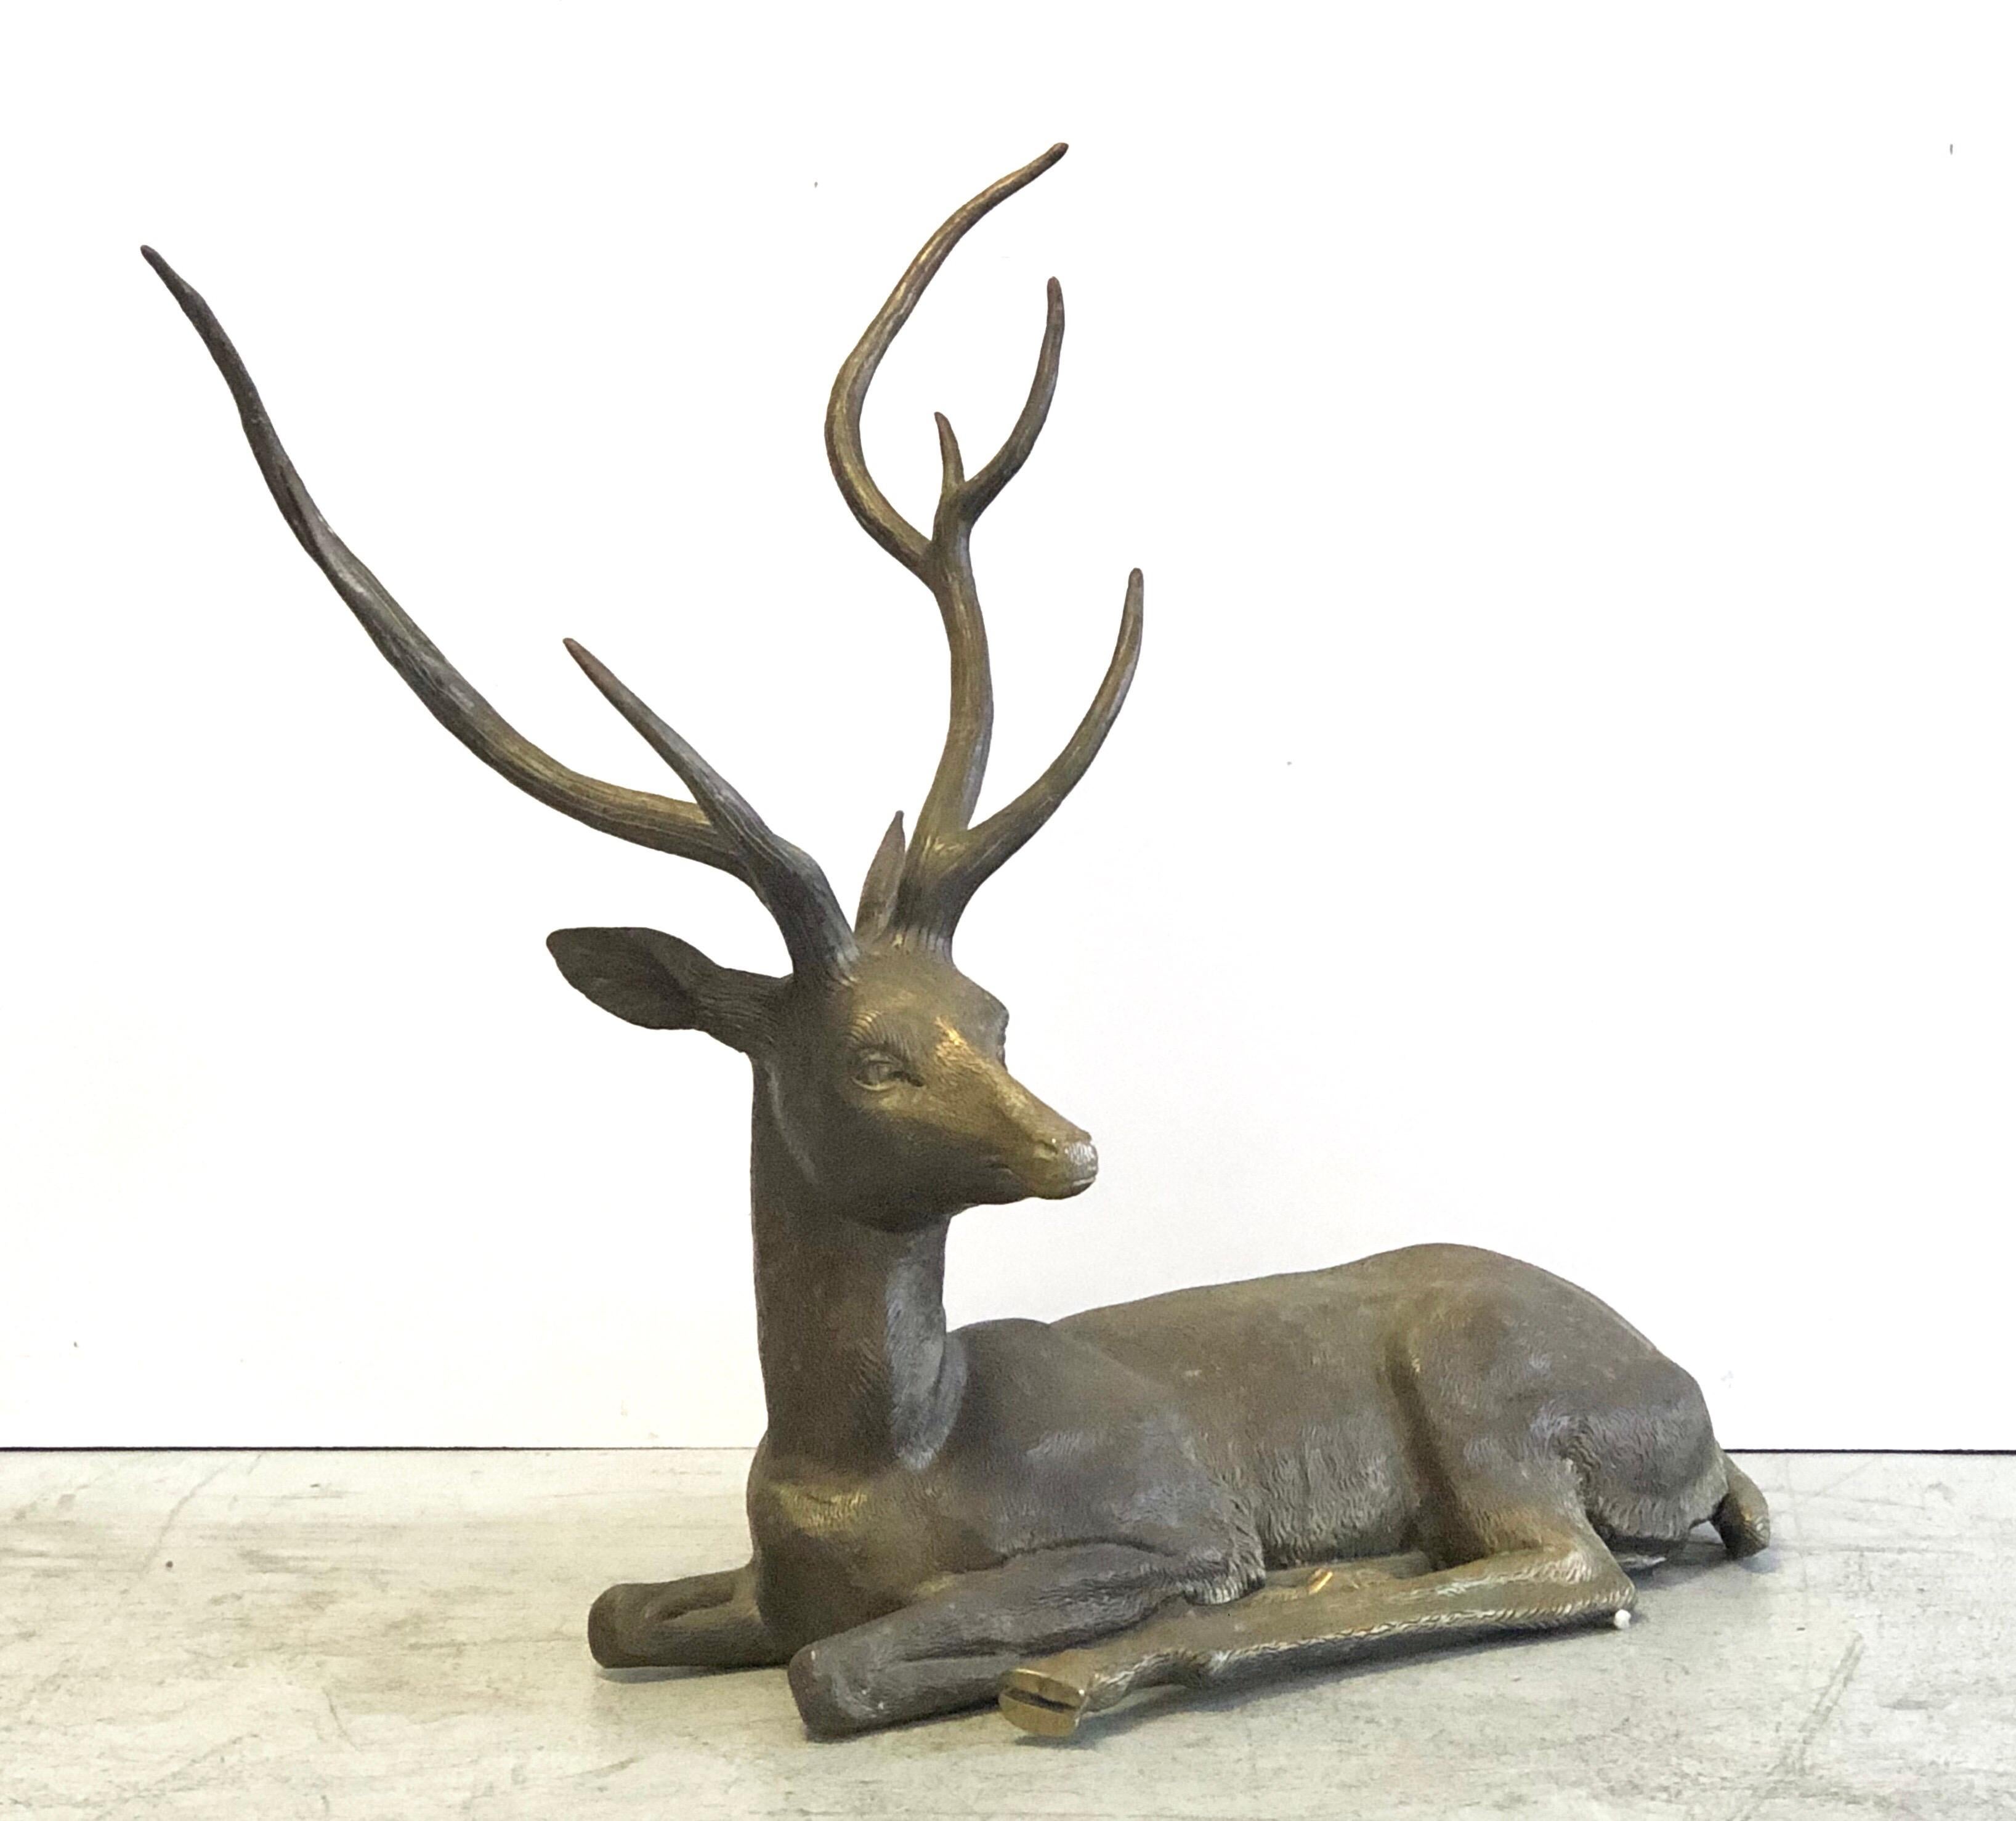 A large brass sculpture of a reclining deer. Striking pose and fine detail in the rendering.